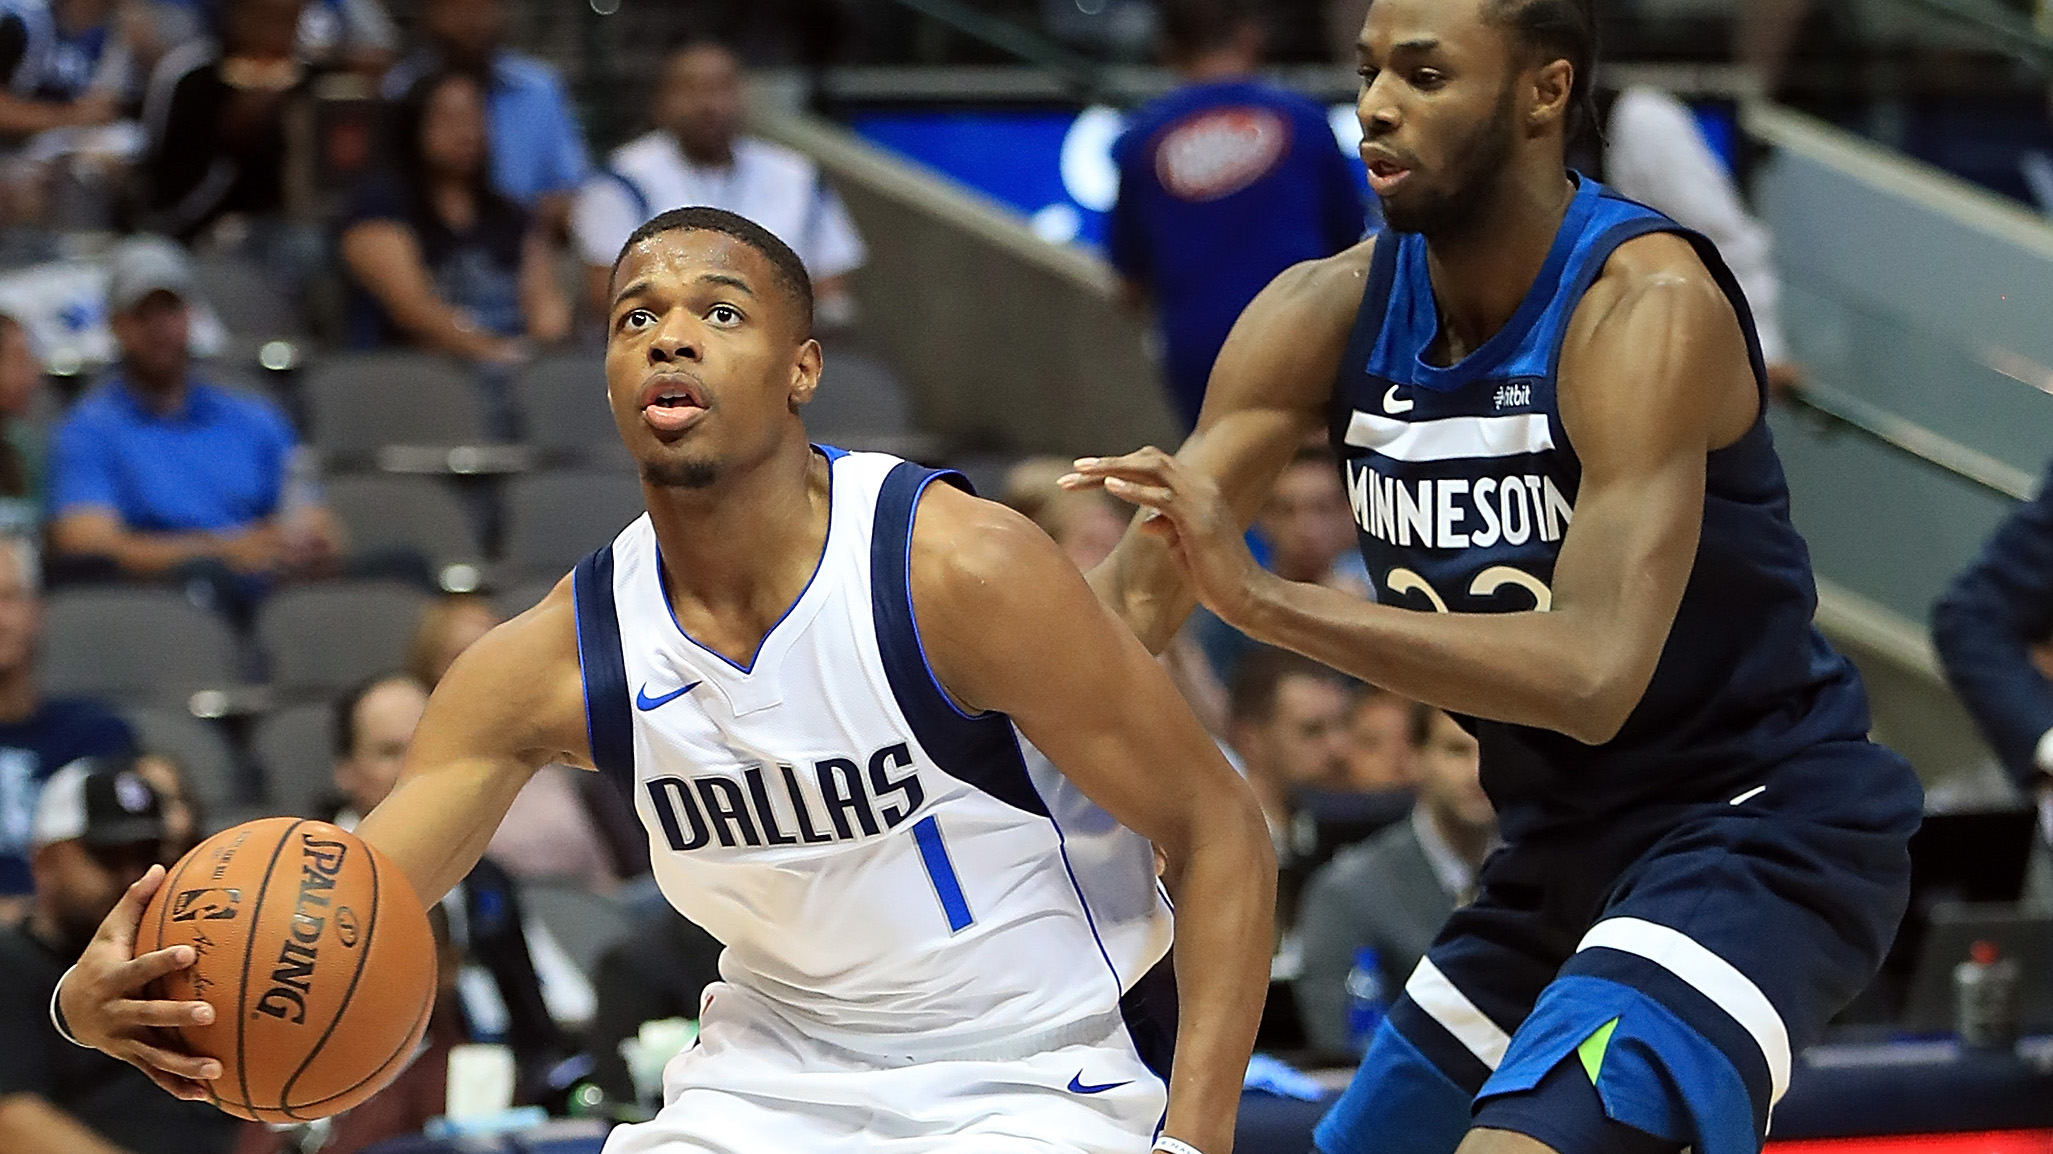 Dennis Smith Jr. proved he belongs in the NBA, but he has a ways to go to  dominate it - Mavs Moneyball